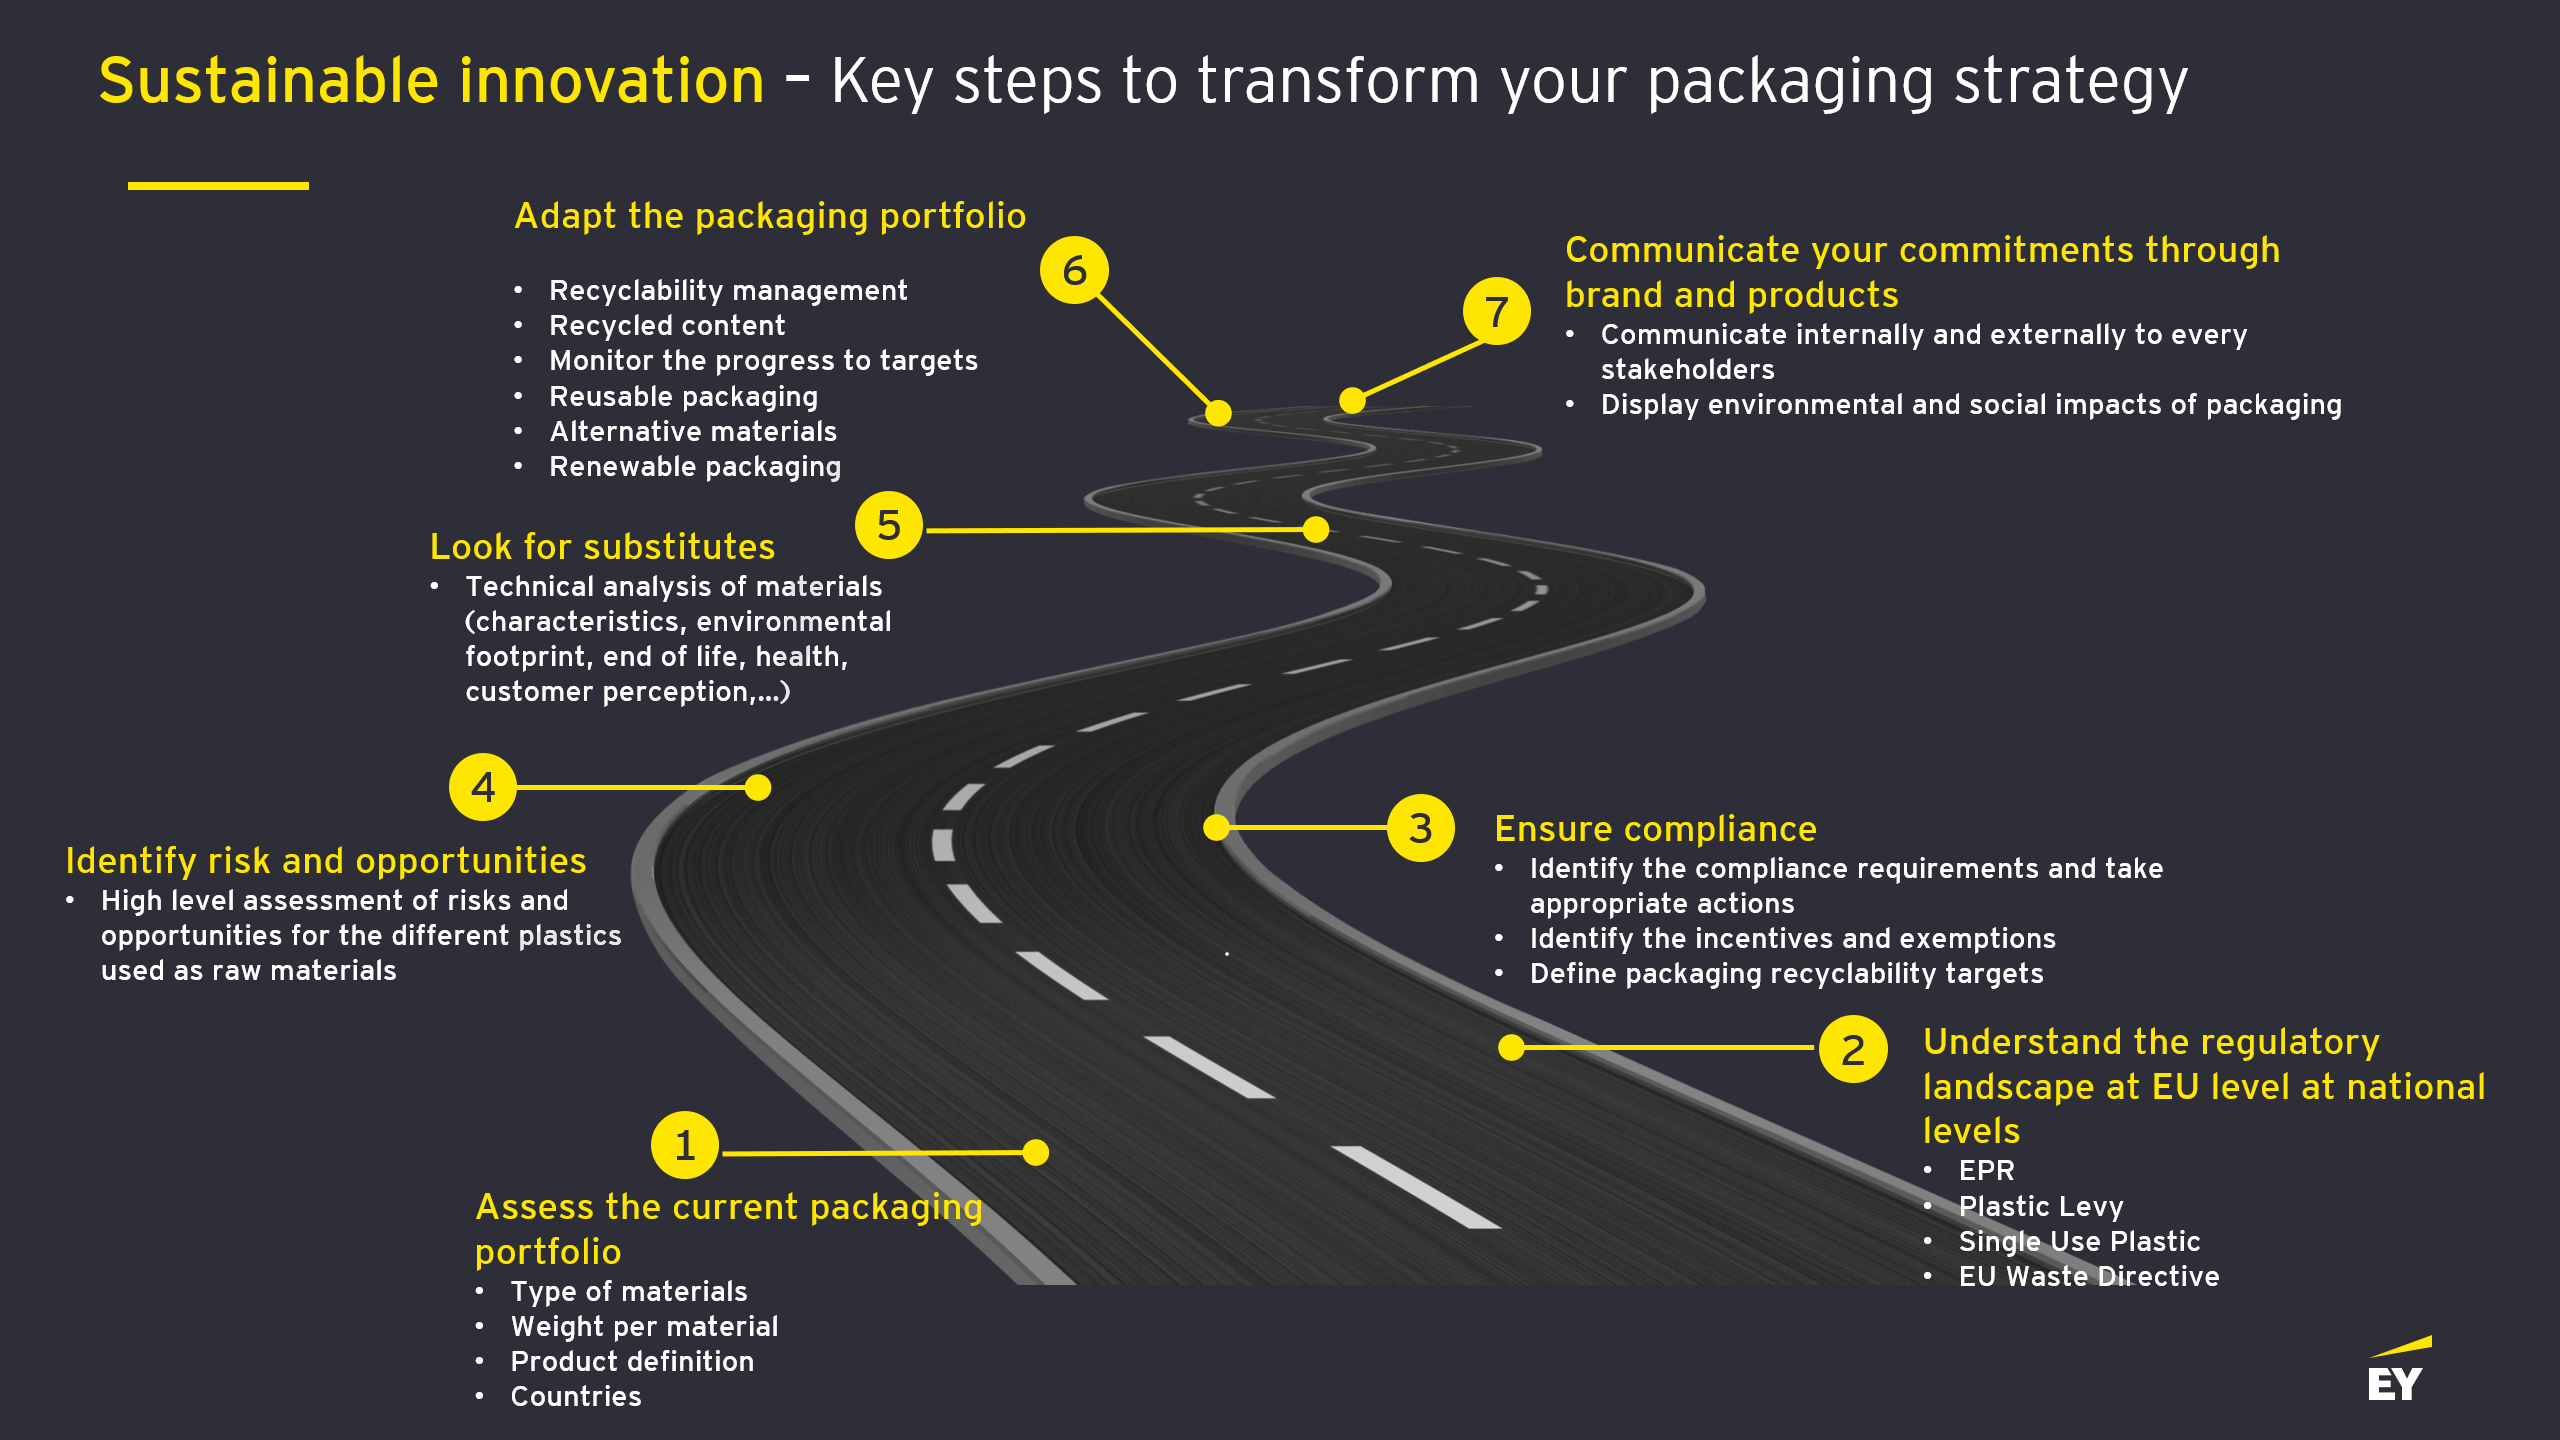 Sustainable innovation - Key steps to transform your packaging strategy